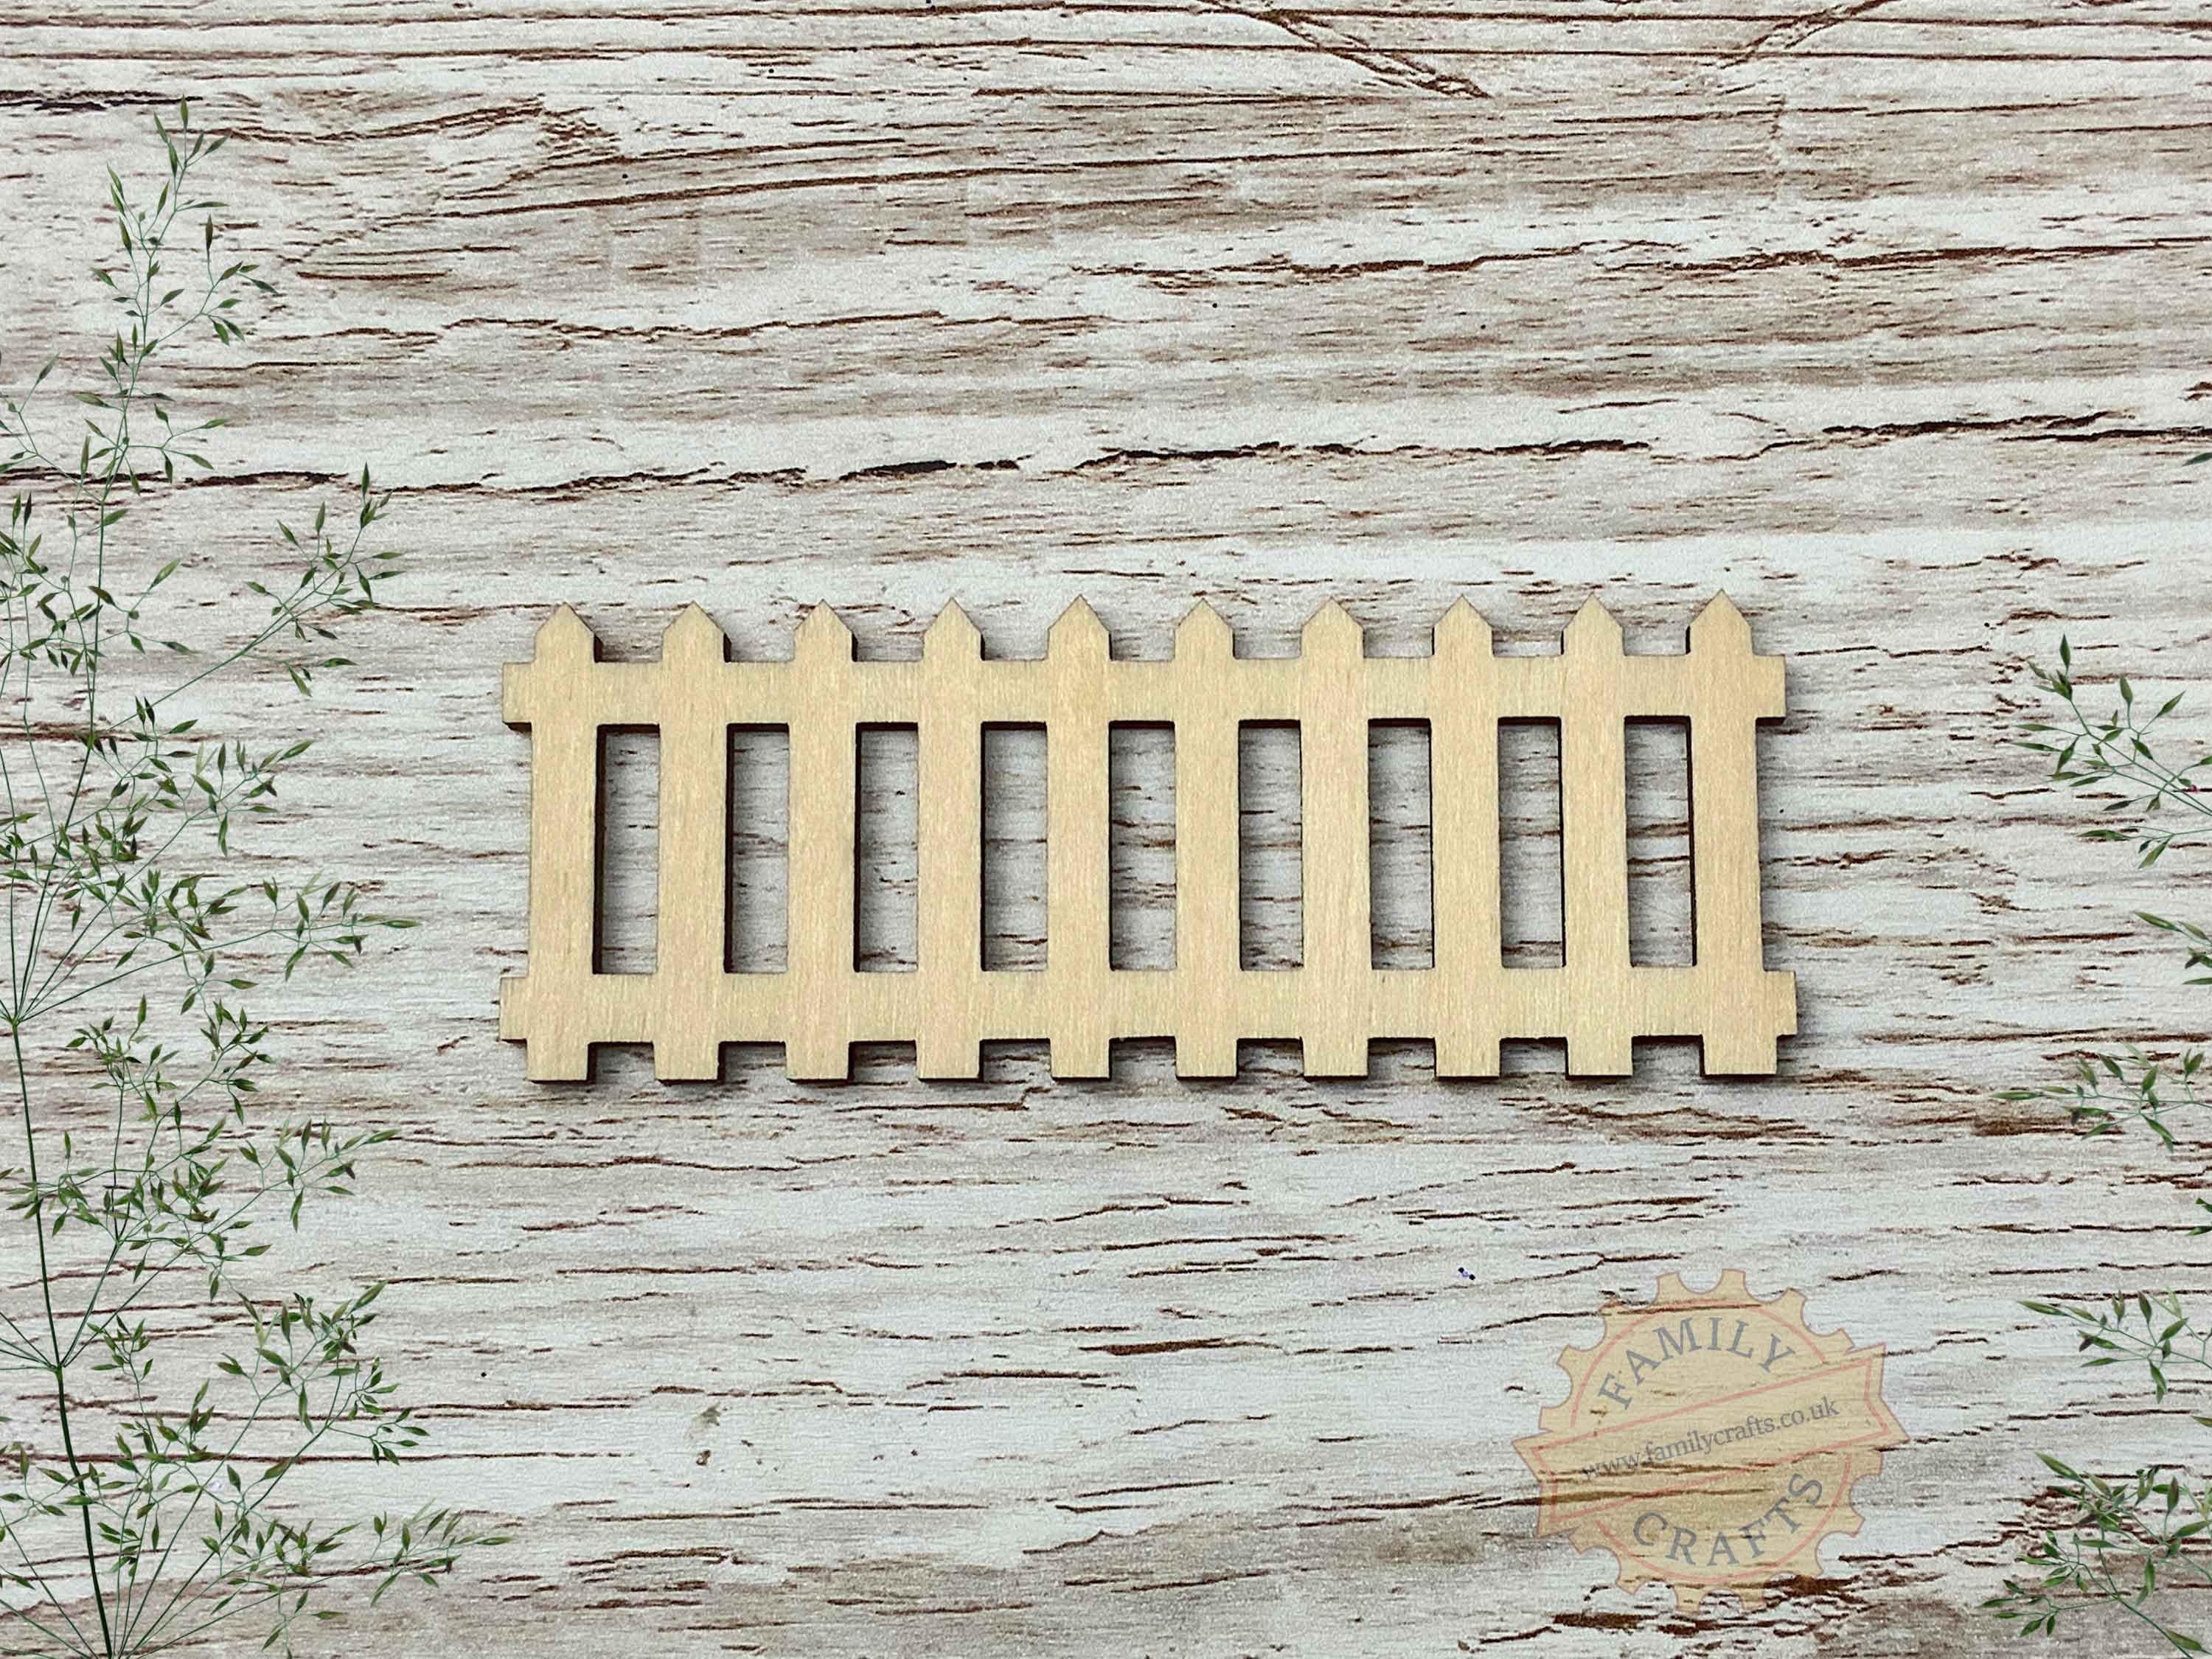 1:100 Scale Fence Model Building Fence For Garden Home, 44% OFF